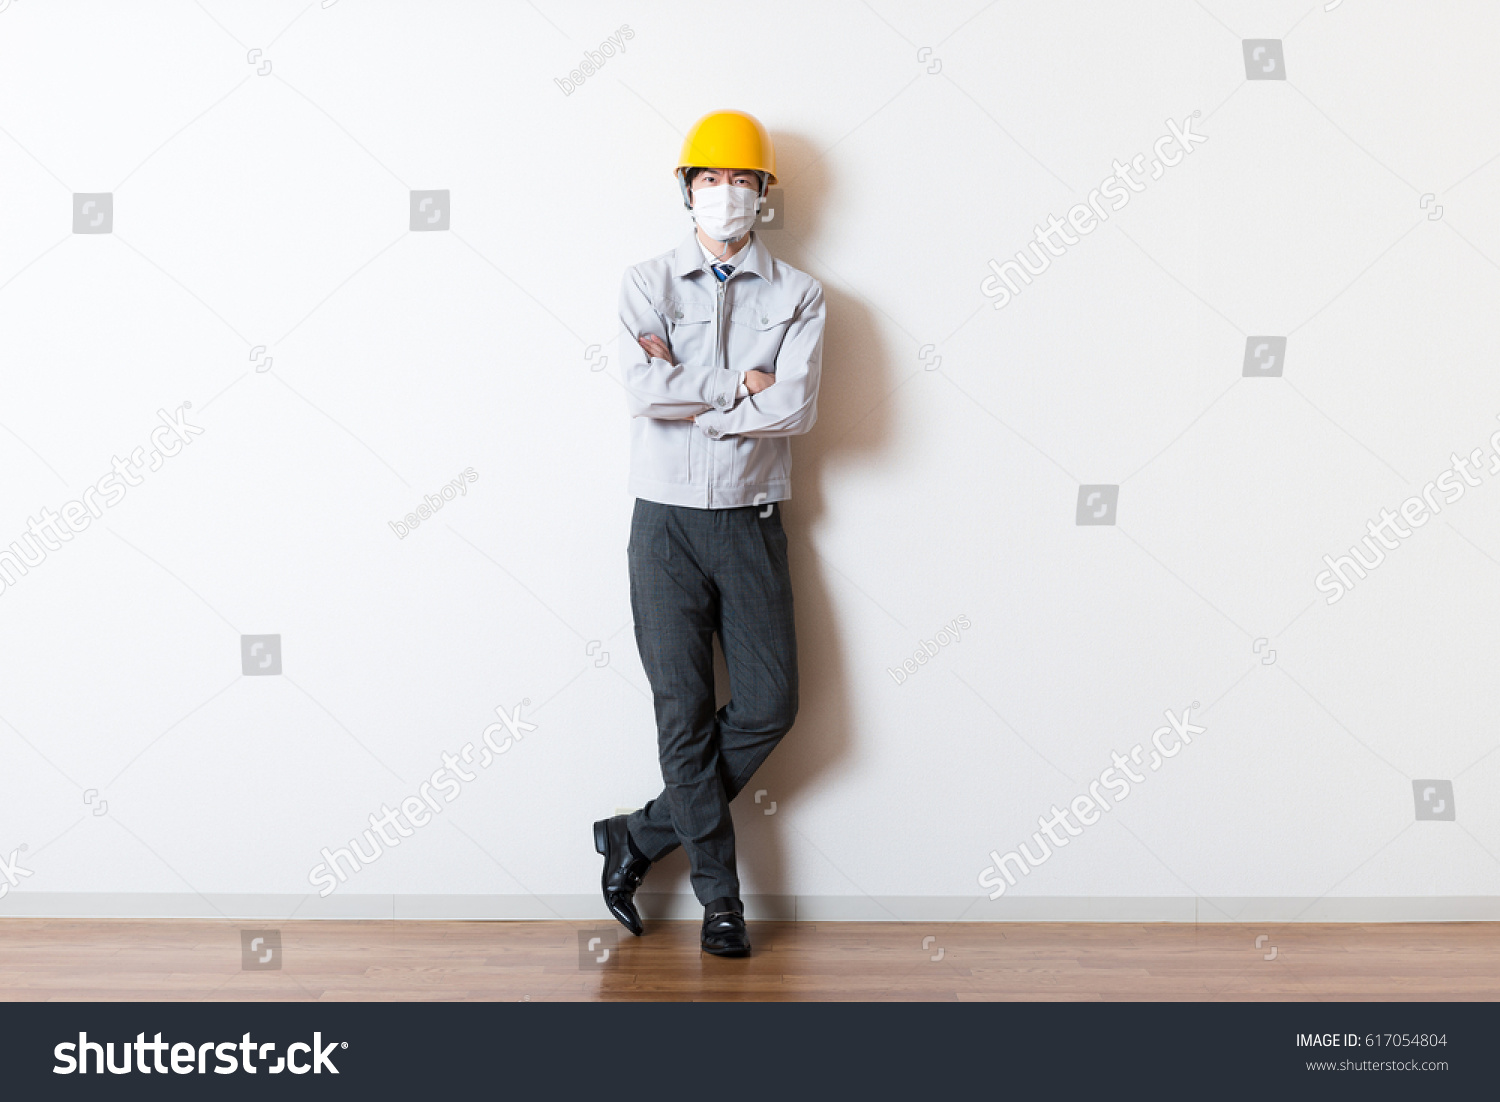 Men standing wearing work clothes with a white background #617054804